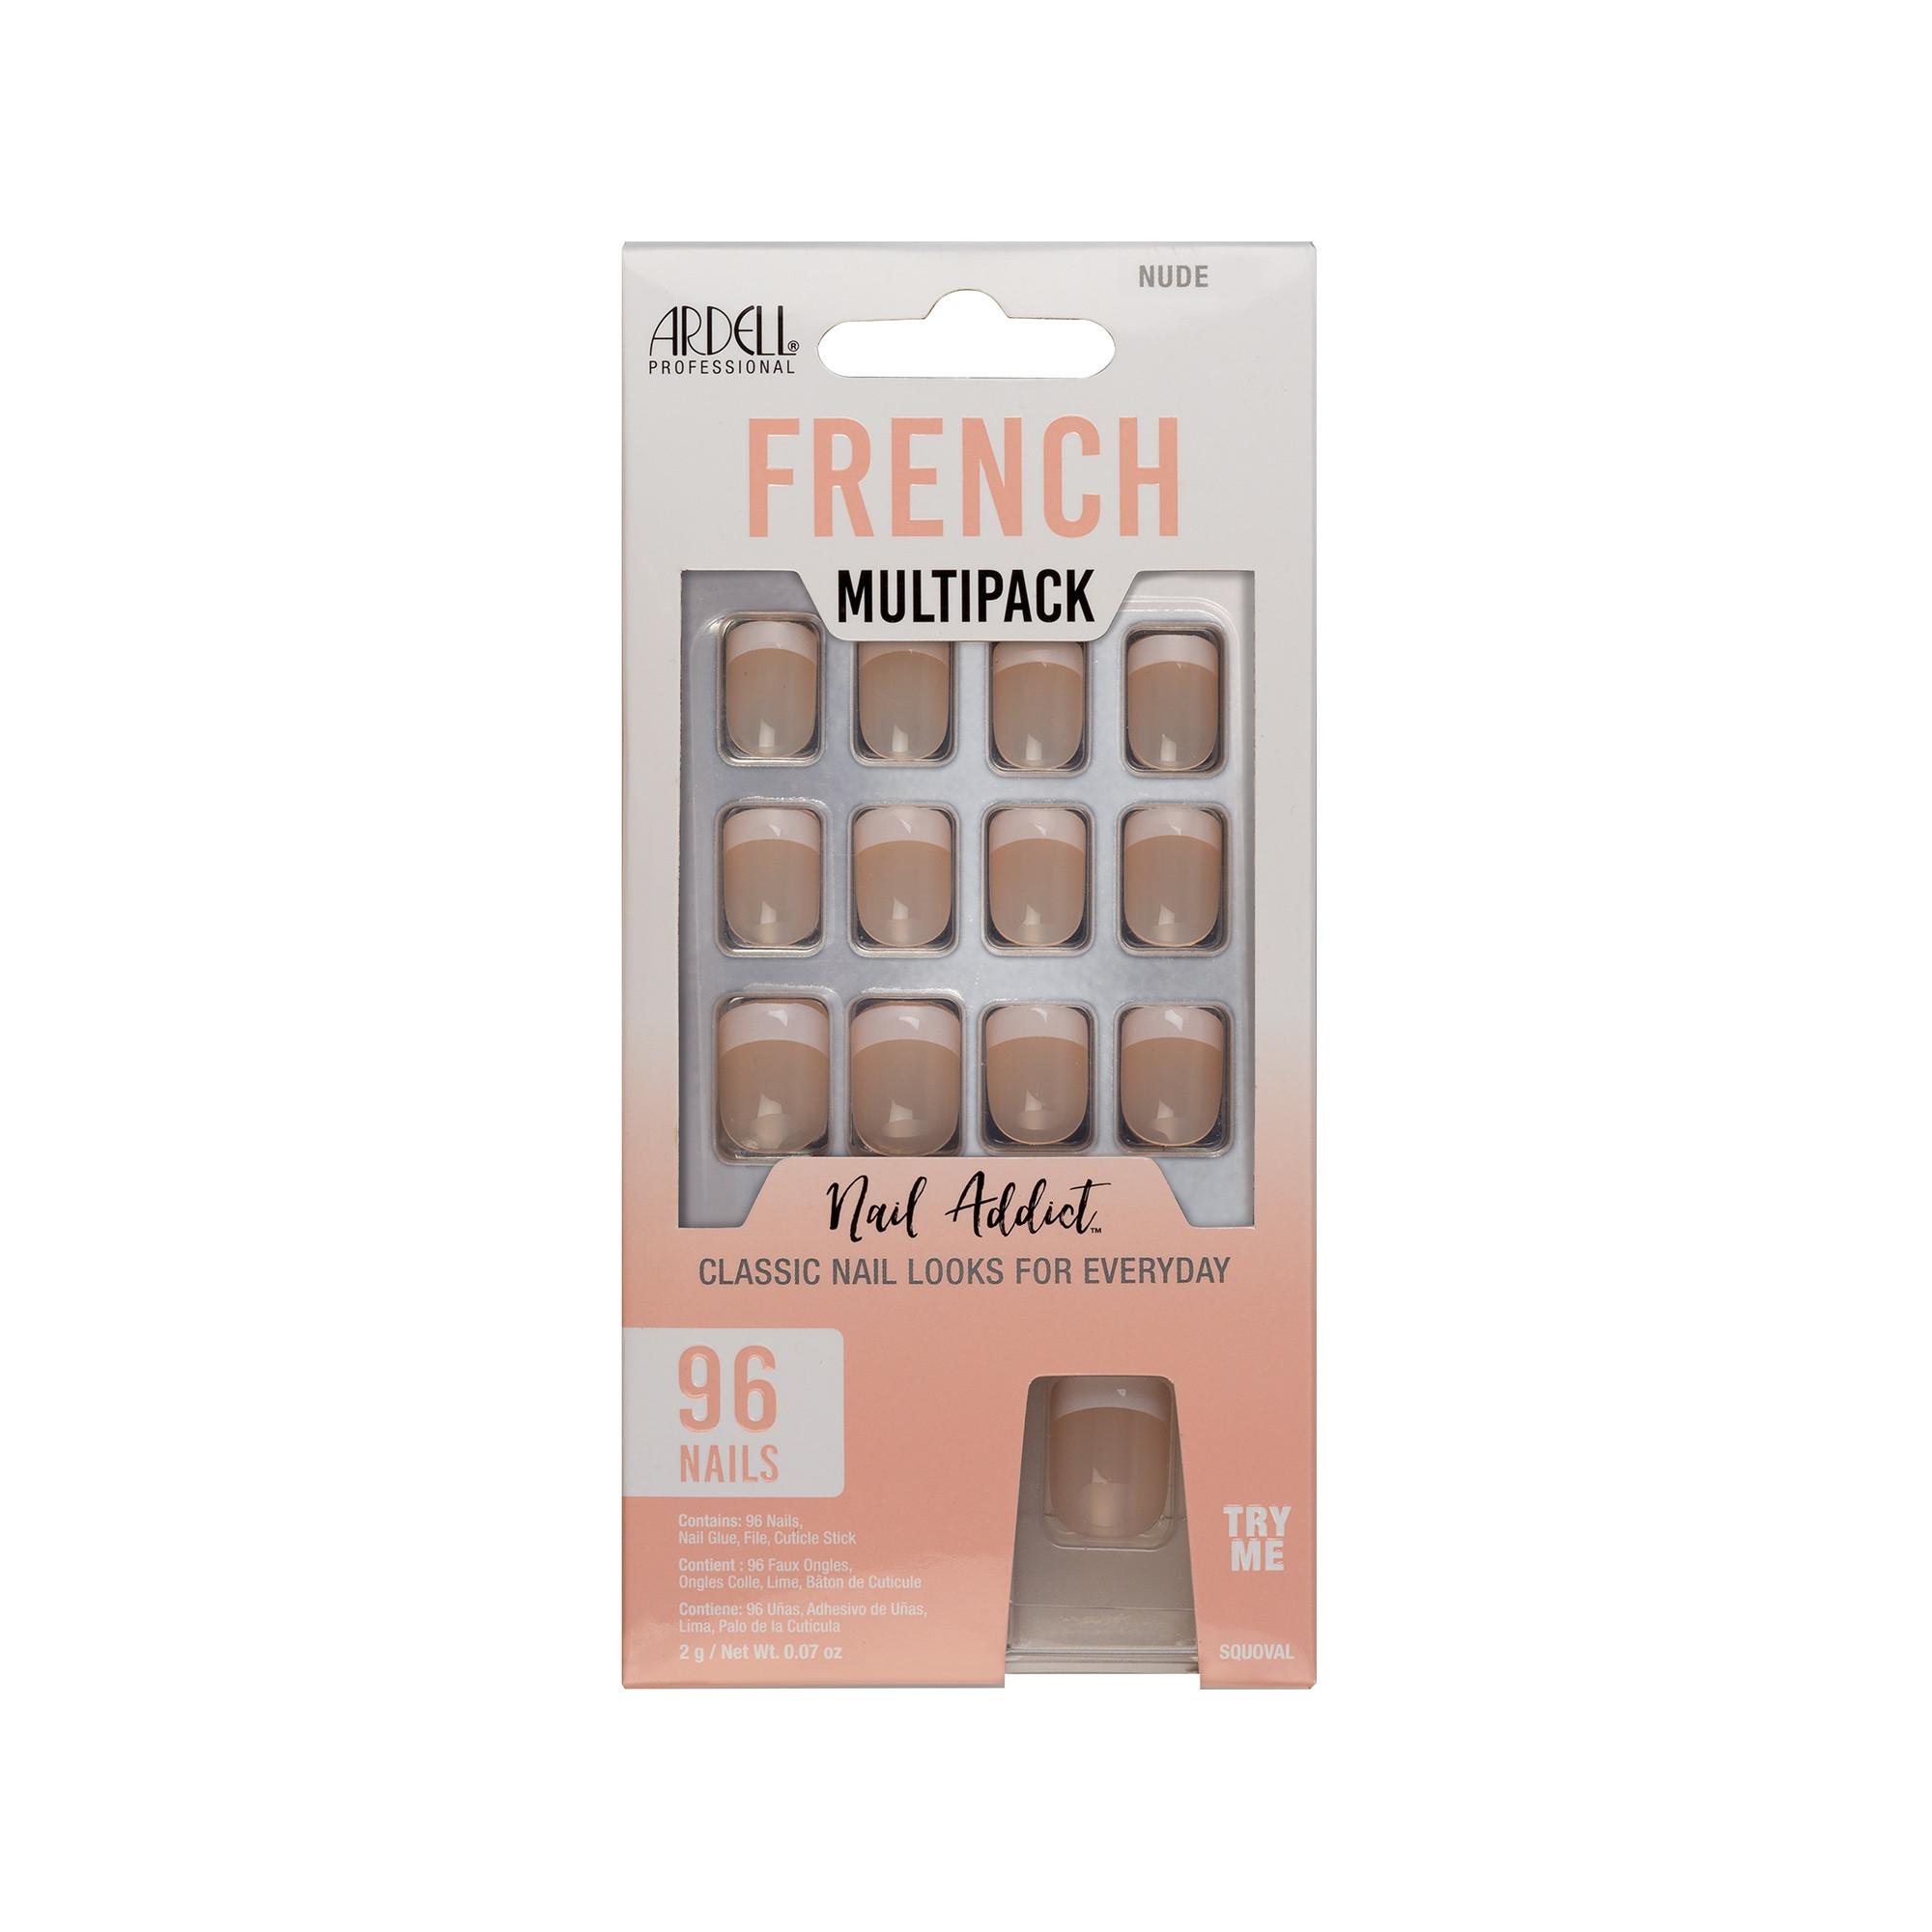 ARDELL  French Multipack Nude 